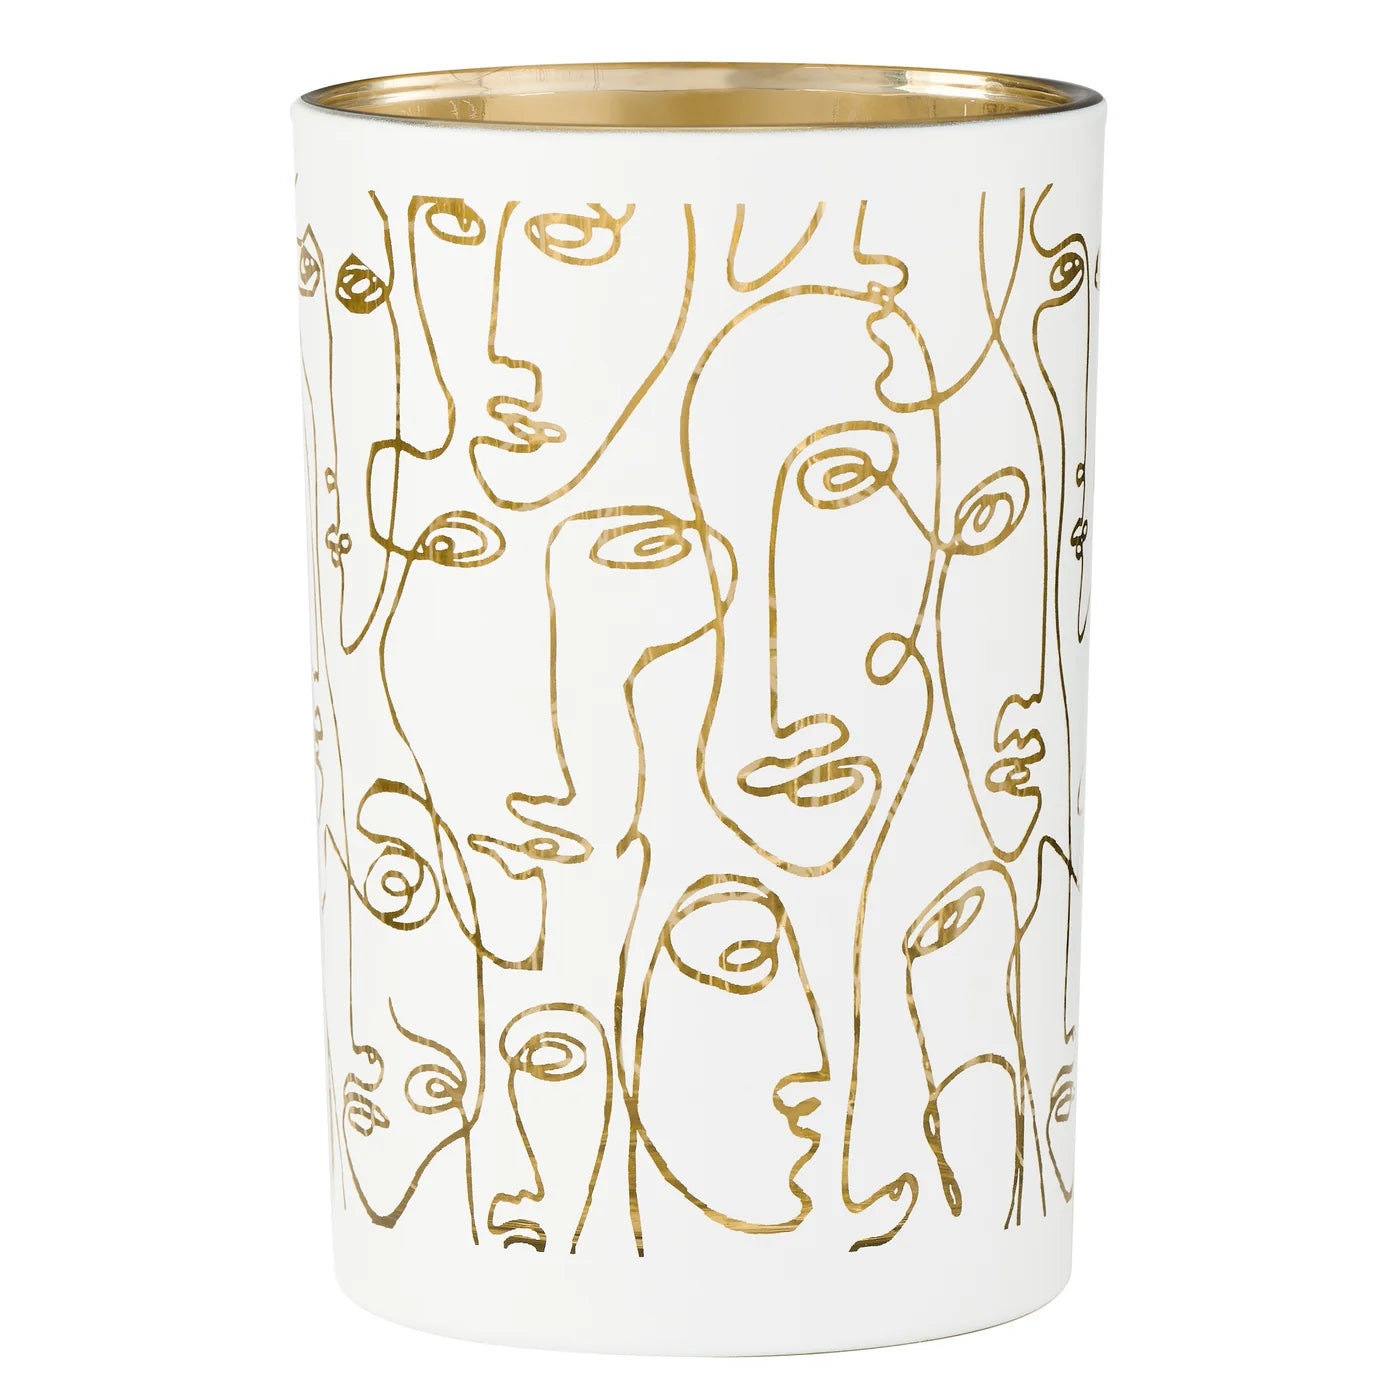 7" Abstract Face Vase - White